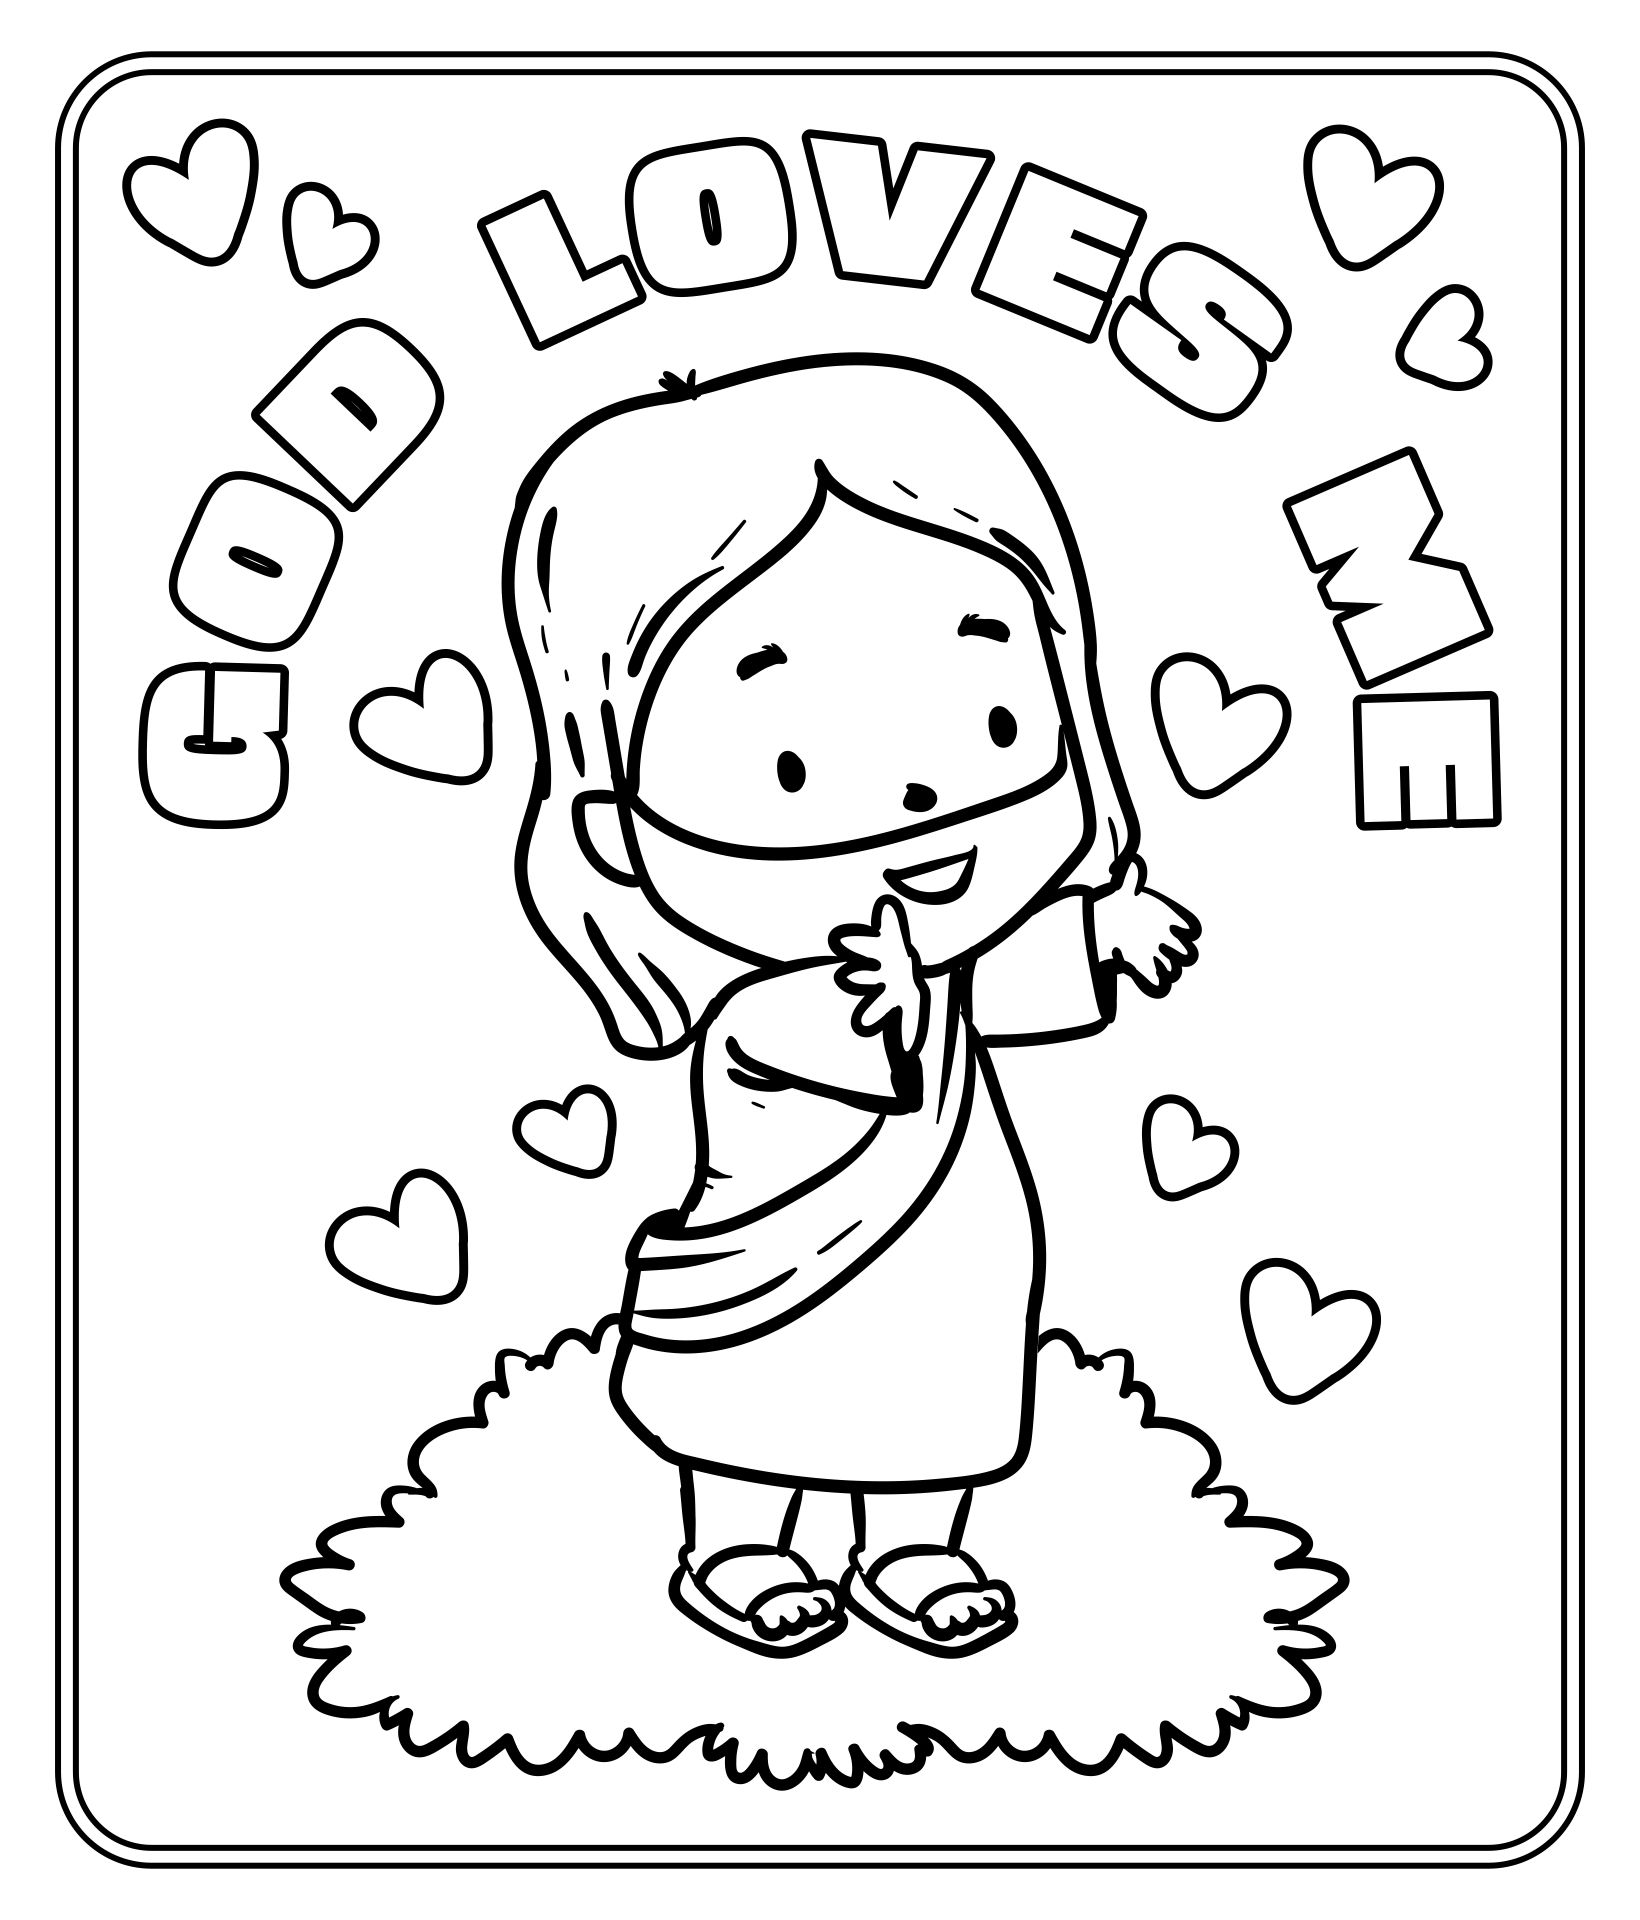 God Loves You Coloring Page